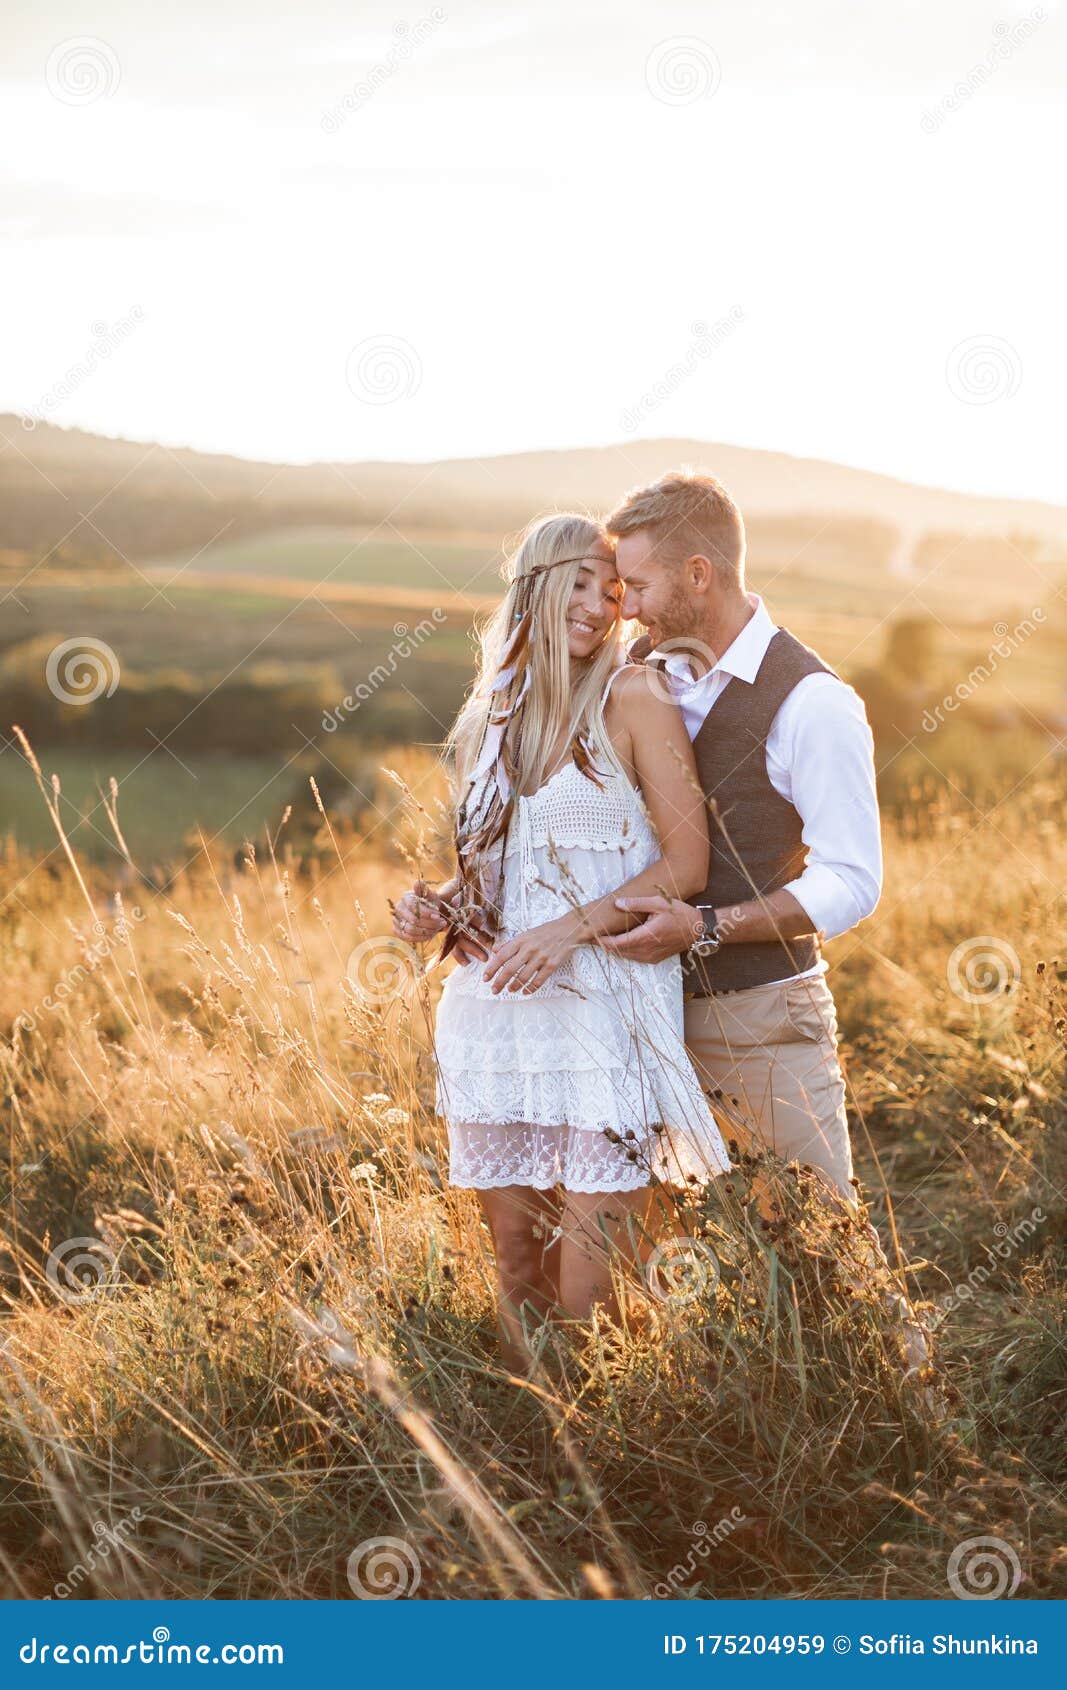 Young Couple in Stylish Boho Rustic Clothes Embracing, Standing in the